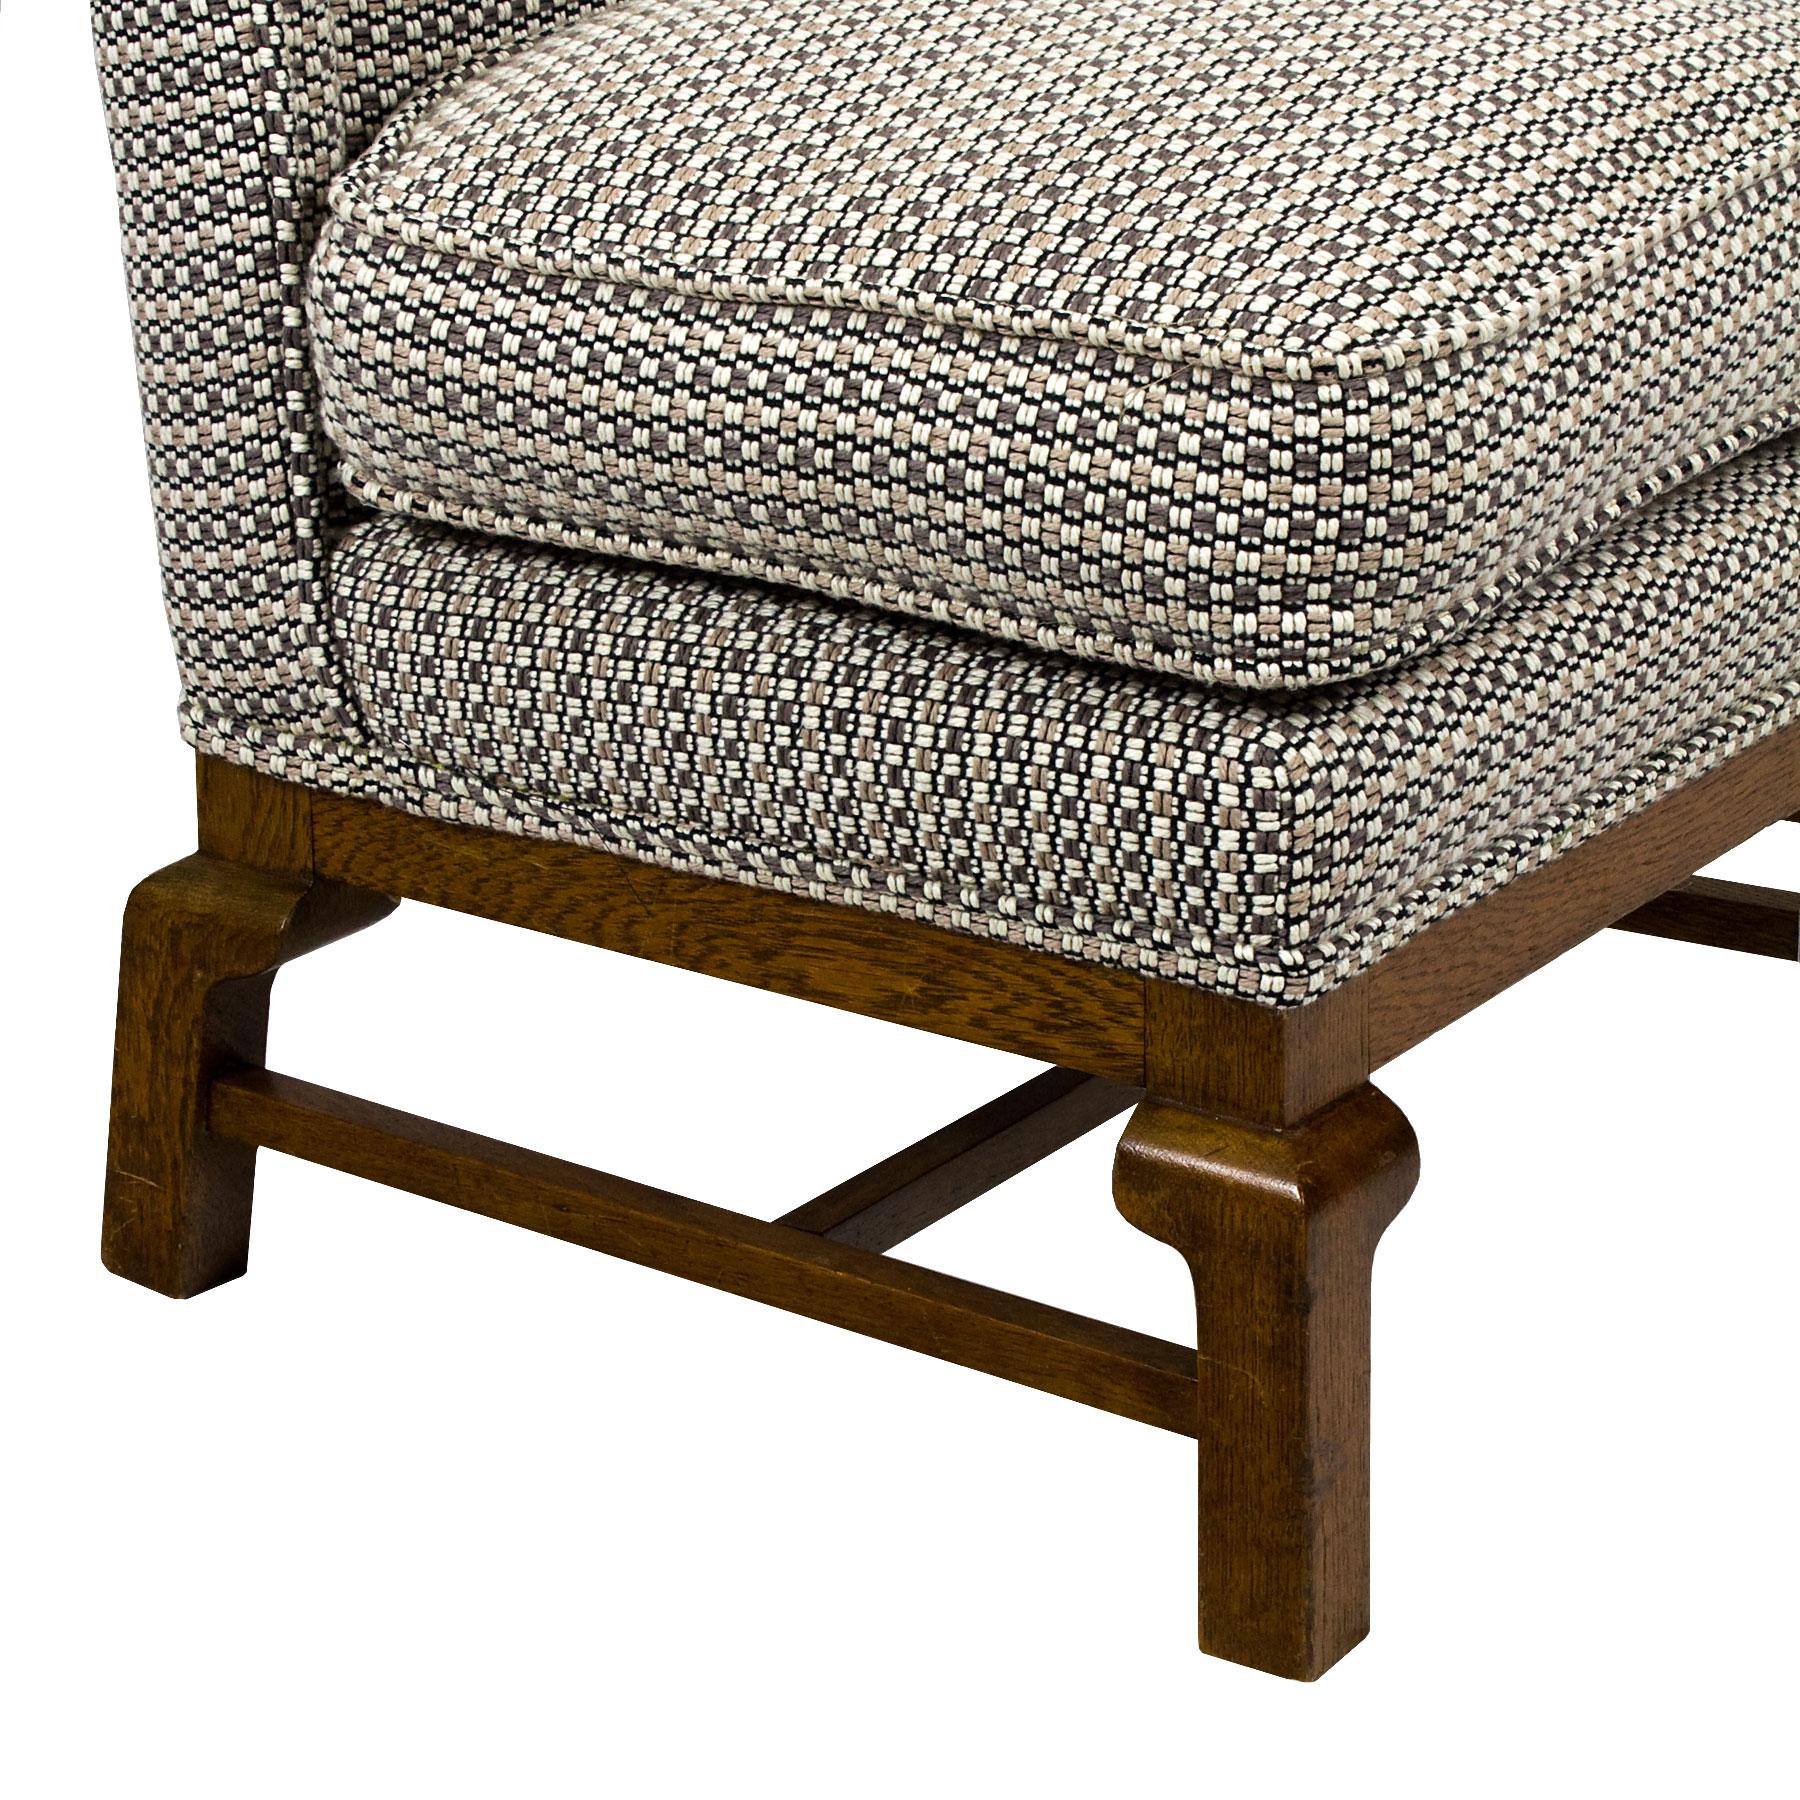 Spanish Low Mid-Century Modern Bedroom Chair in Oak and Pierre Frey's Fabric - Barcelona For Sale